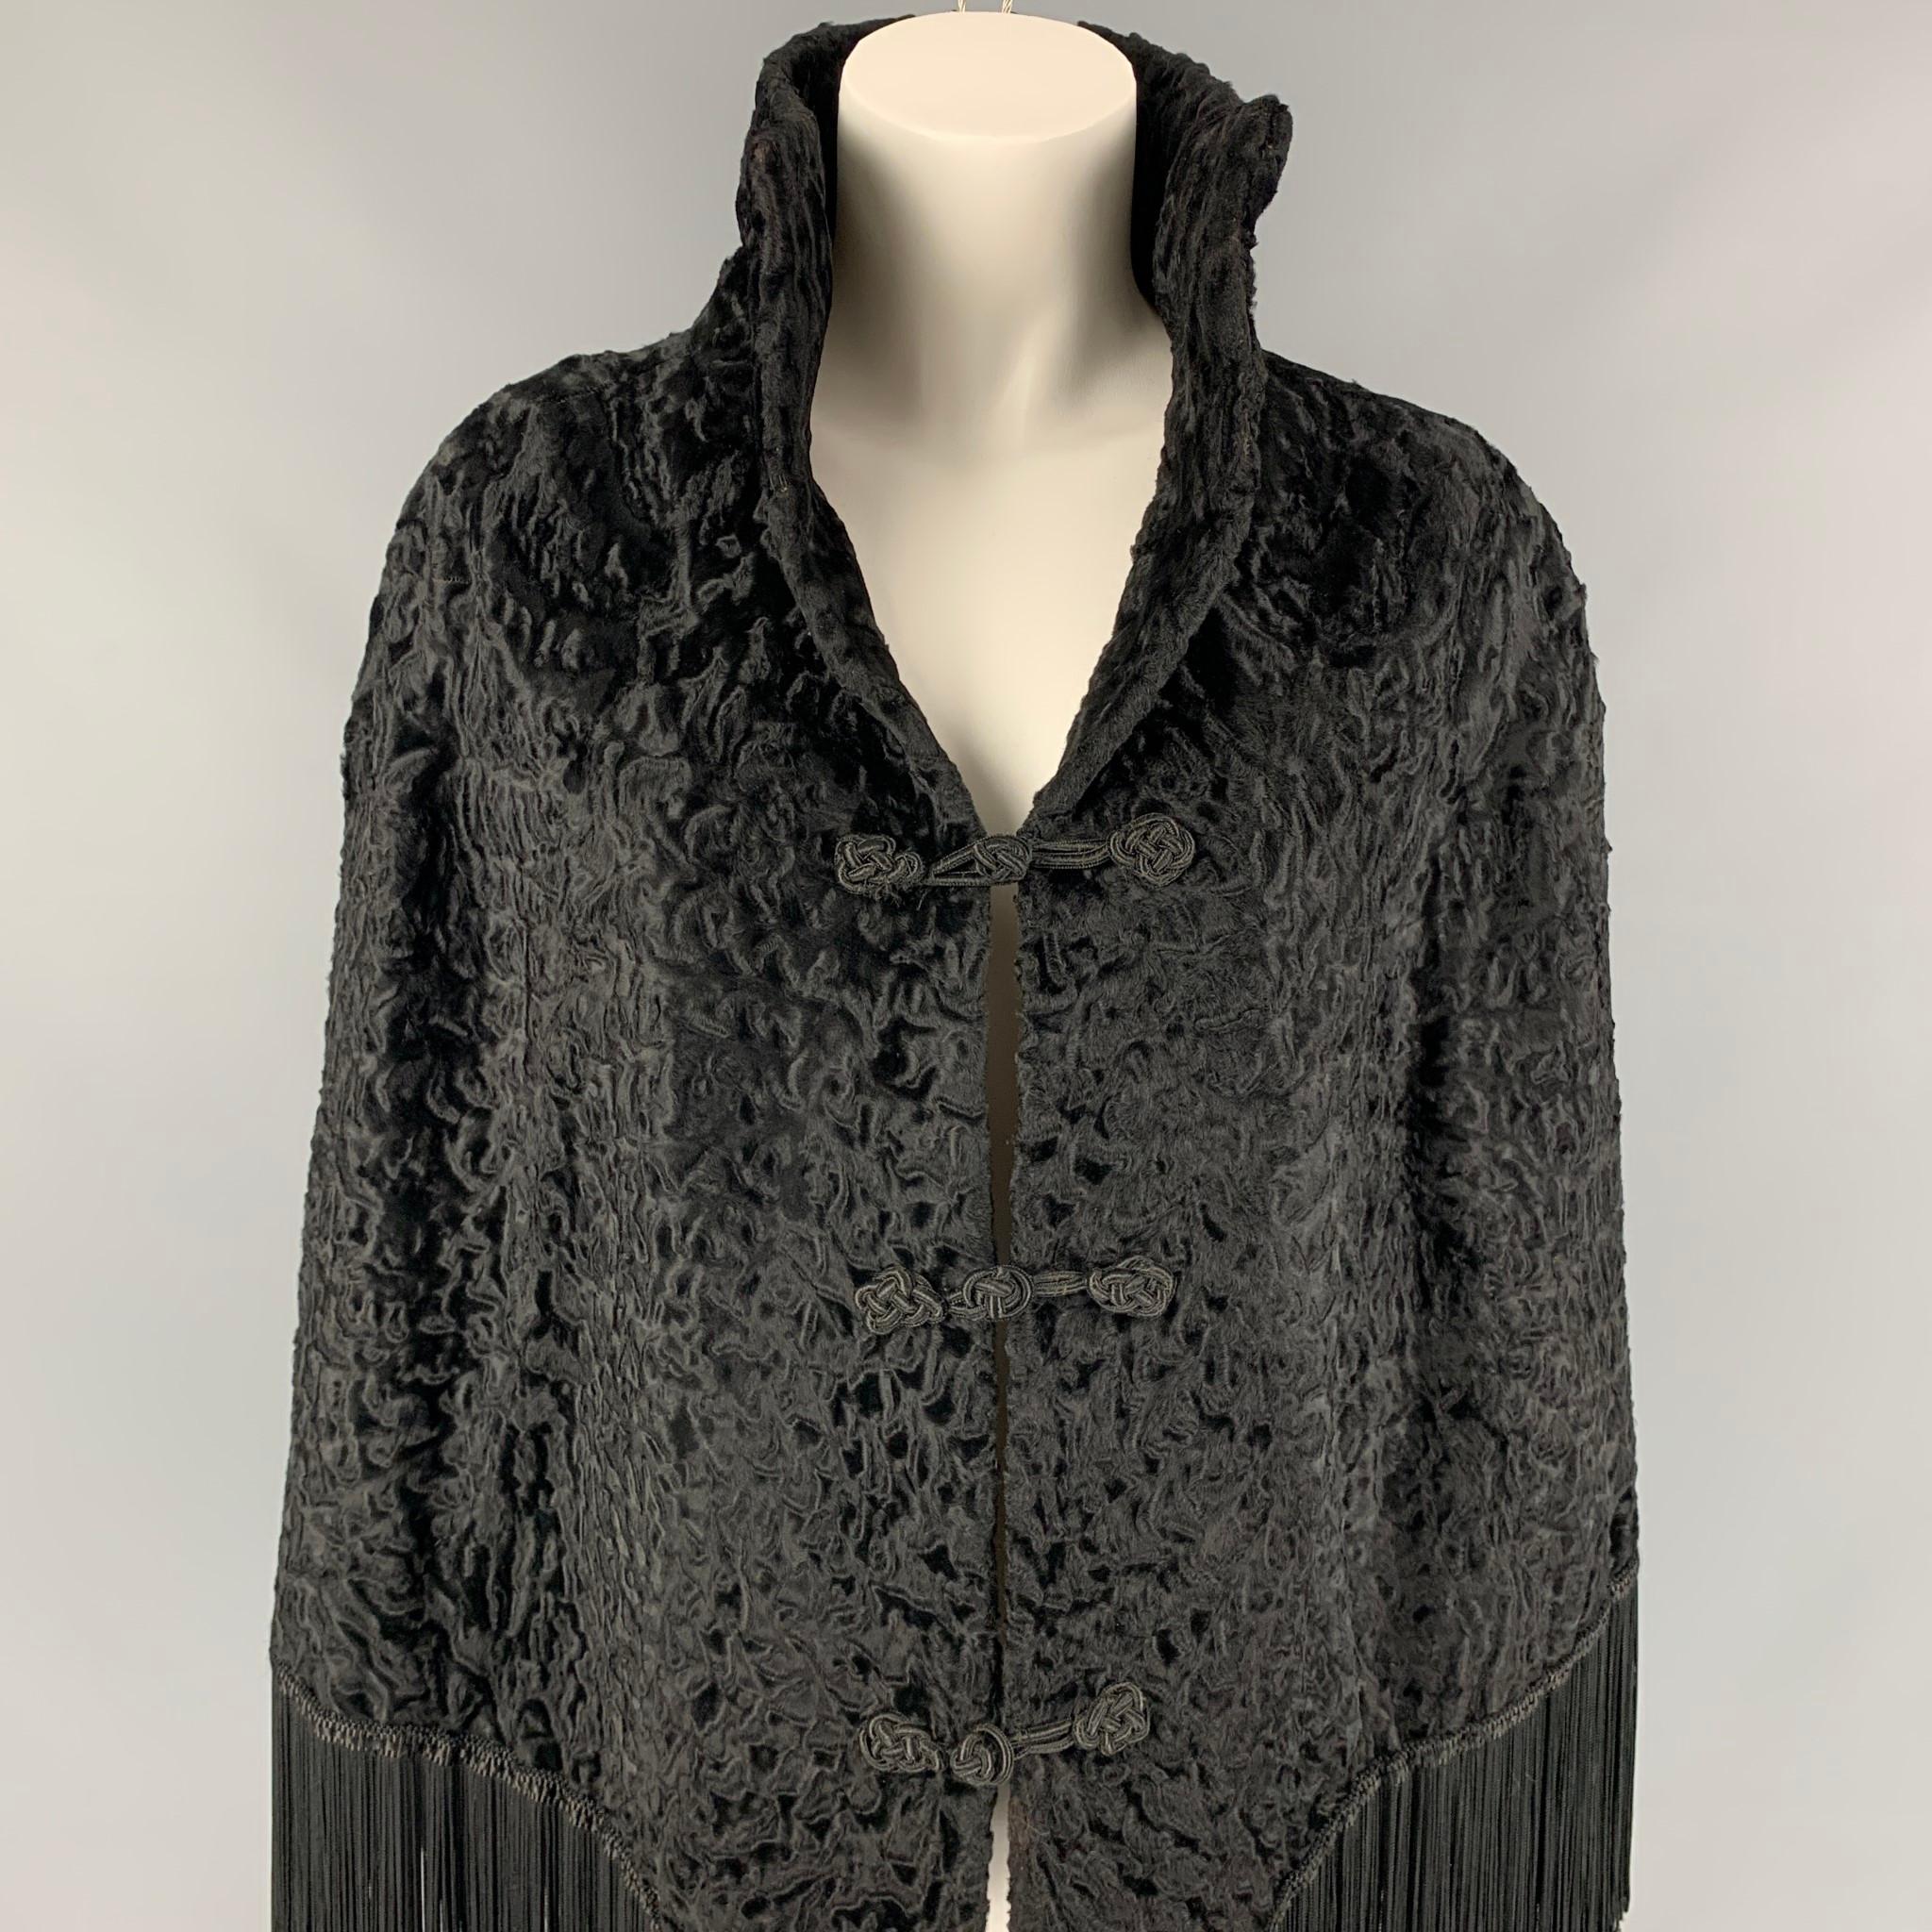 ADRIENNE LANDAU x WACHTENHEIM cape comes in a black textured ashtrackhan fur featuring a shawl collar, fringe trim, and toggle button closure. 

Very Good Pre-Owned Condition.
Marked: Size tag removed.

Measurements:

Shoulder: 18 in.
Length: 27 in. 